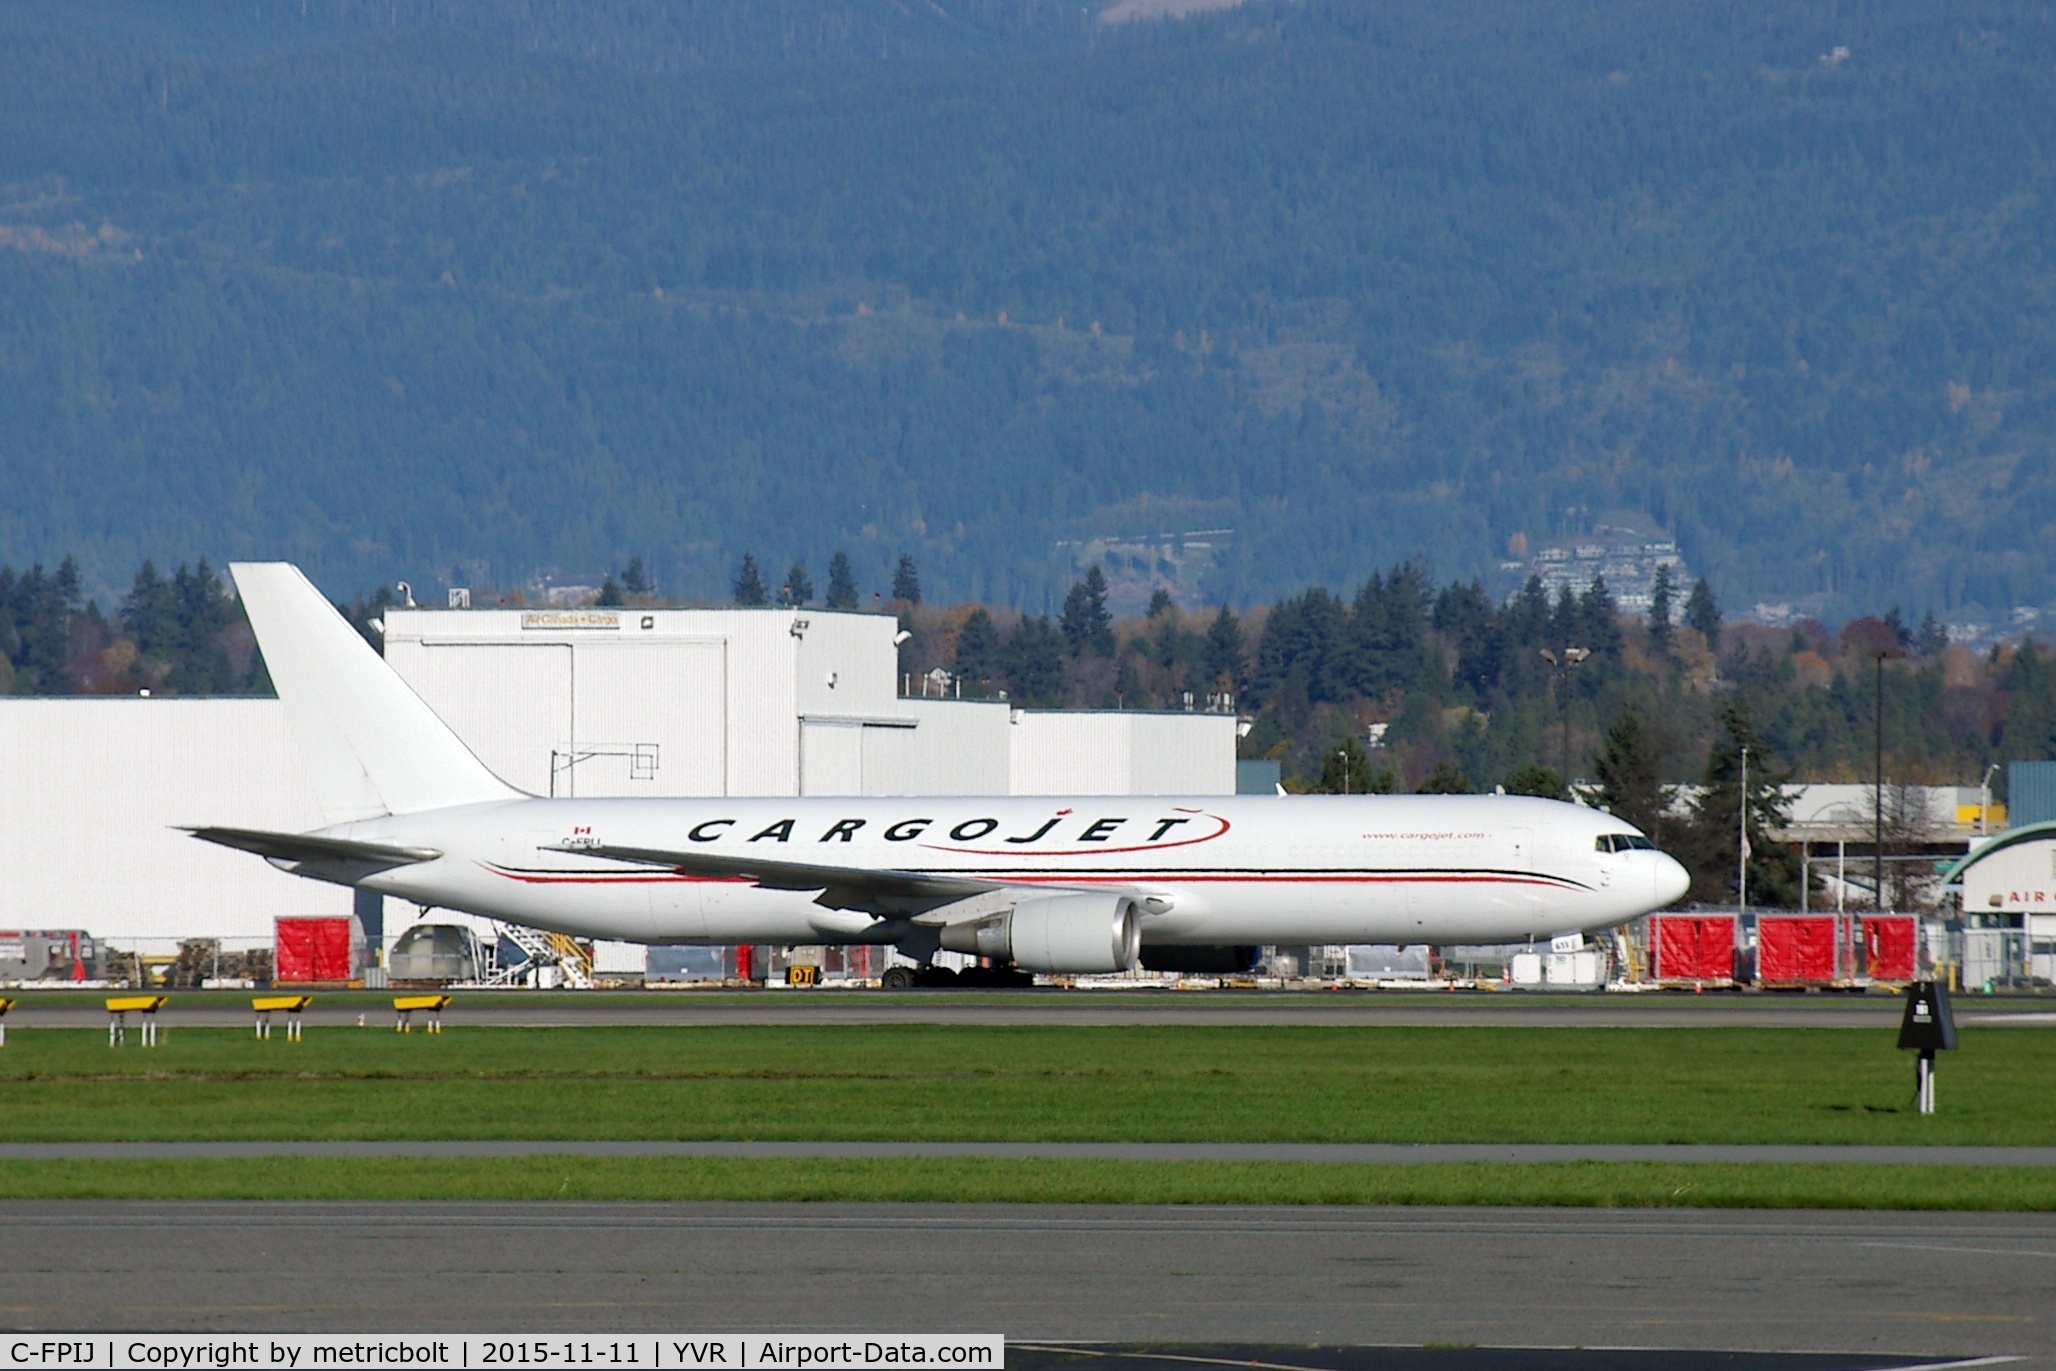 C-FPIJ, 1996 Boeing 767-33A/ER C/N 27918, Stripes added to previous white fuselage.